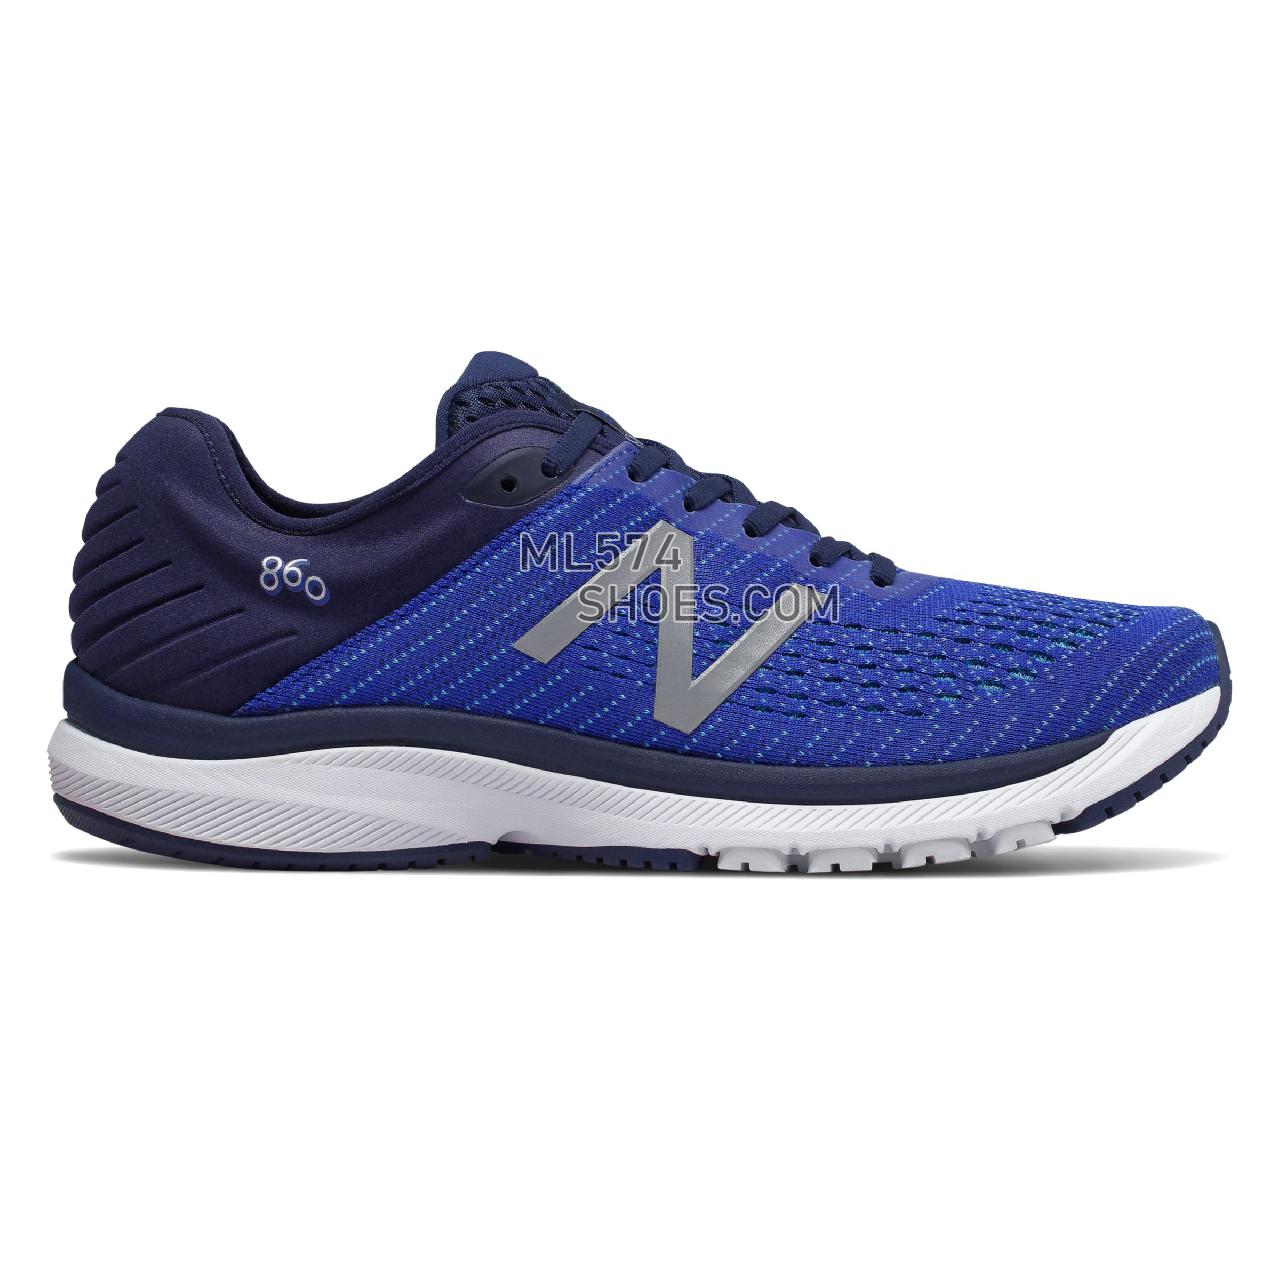 New Balance 860v10 - Men's Stability Running - UV Blue with Bayside and Pigment - M860B10